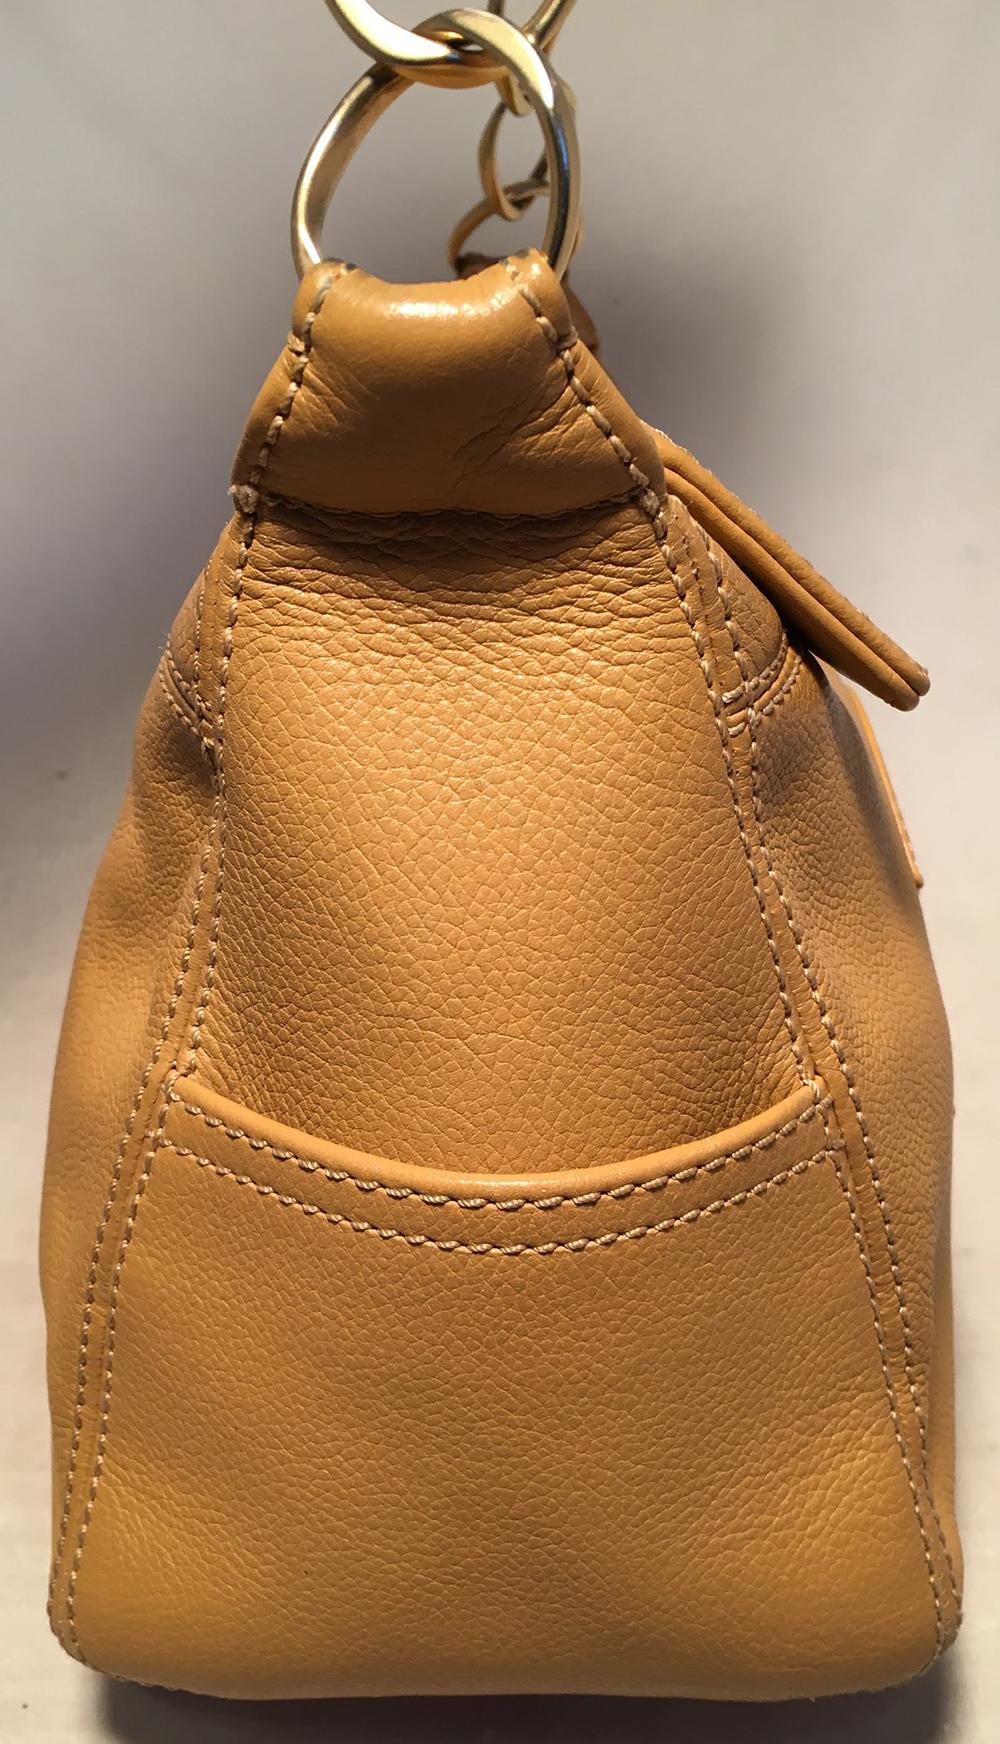 Chanel Tan Caviar CC Shoulder Bag in very good condition. Tan caviar leather exterior trimmed with matte gold hardware and the CC logo quilted along the front side. Top zipper closure opens to a tan nylon interior that holds one zip and one slit